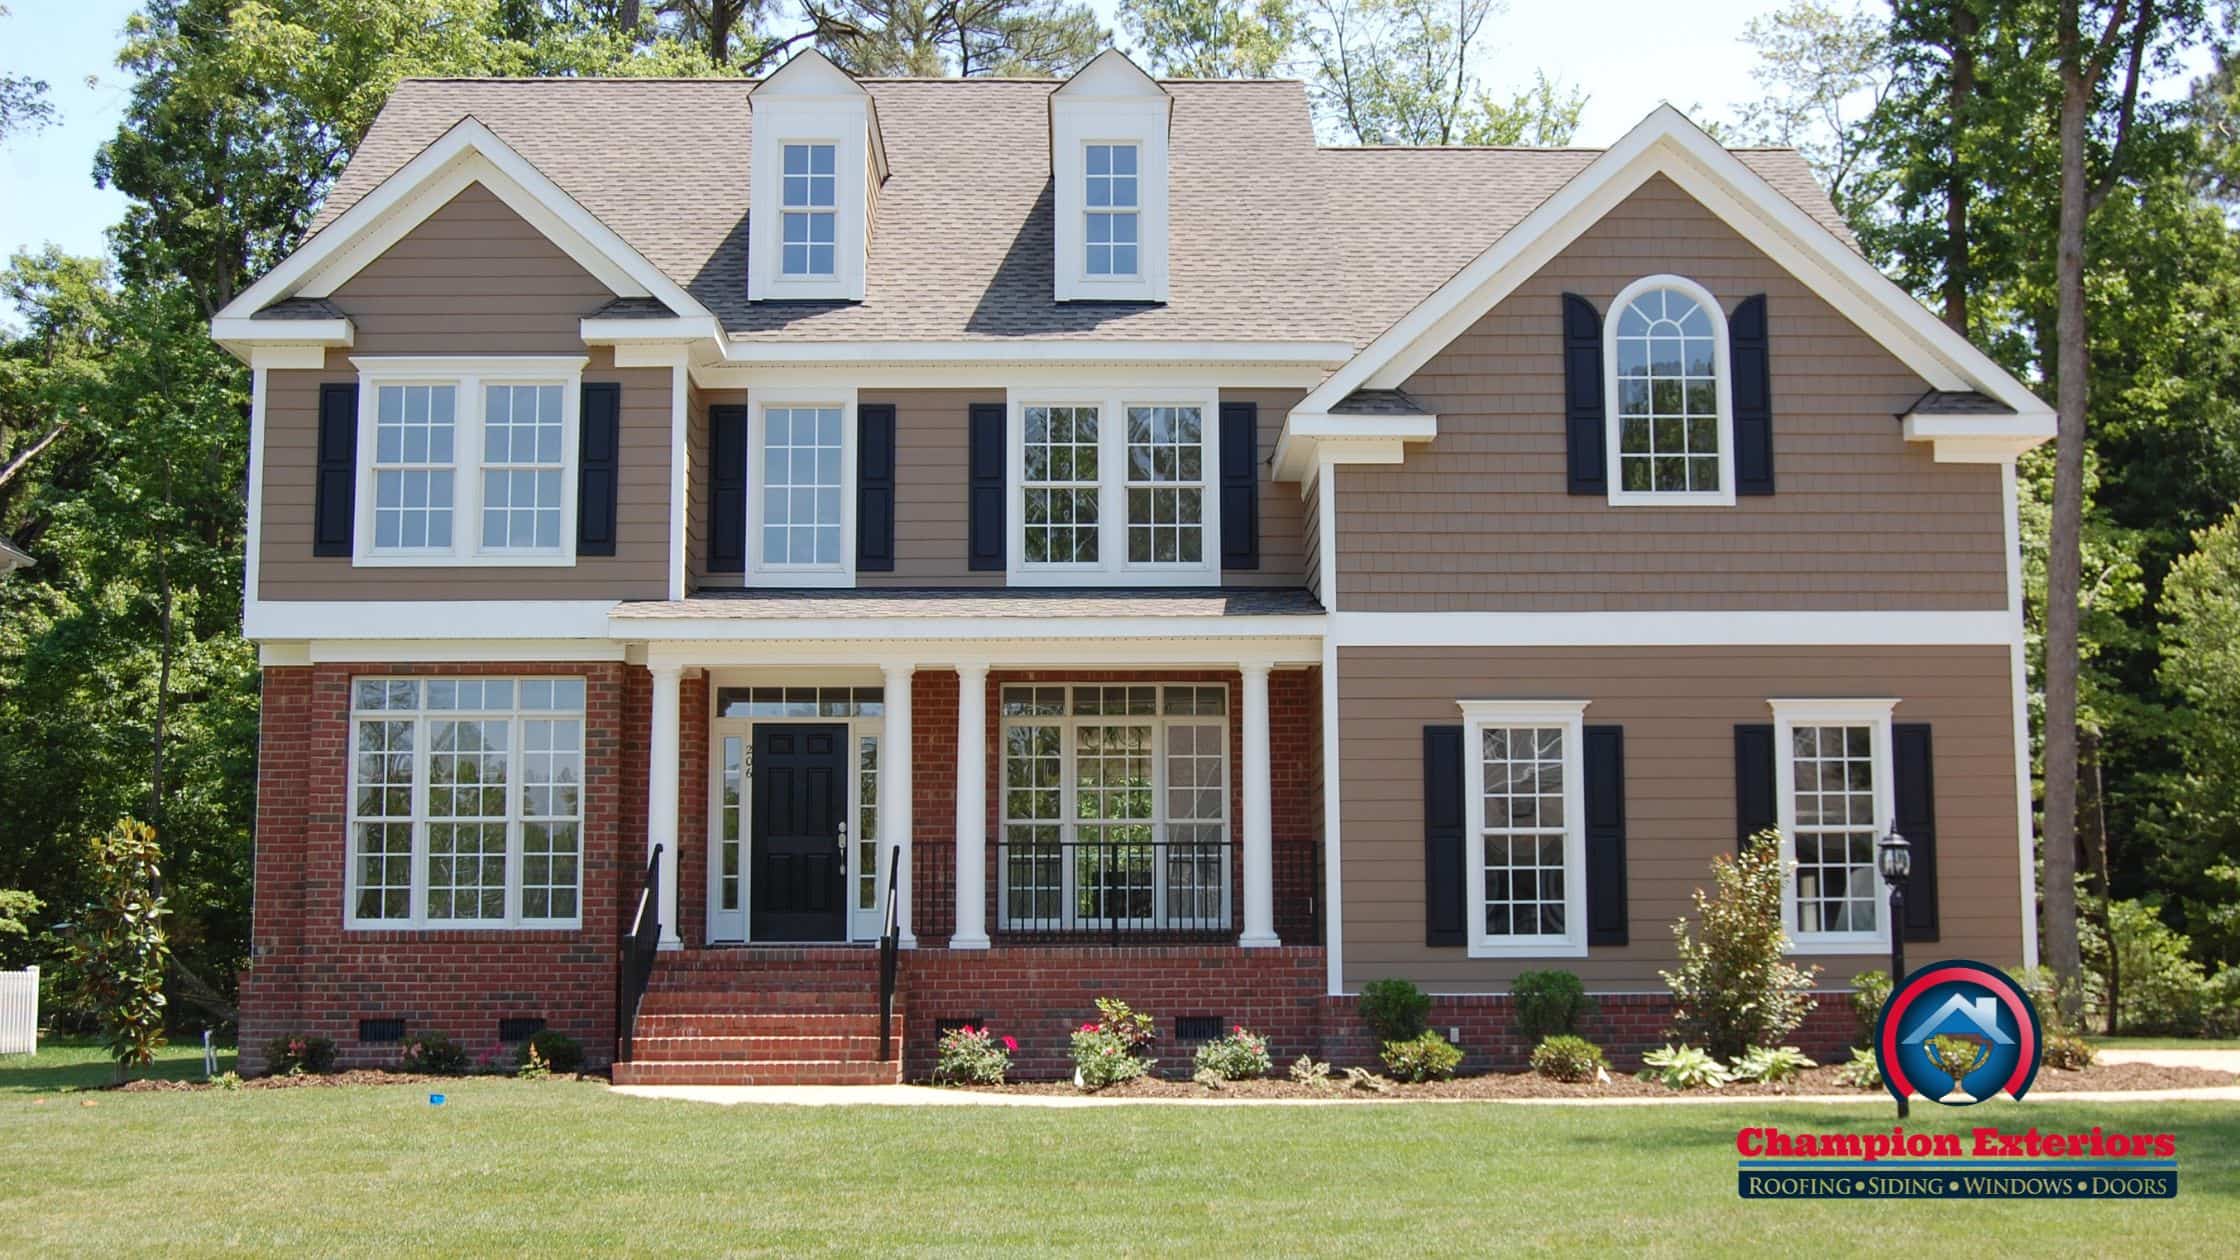 10 Best Roofing Companies In Cherry Hill